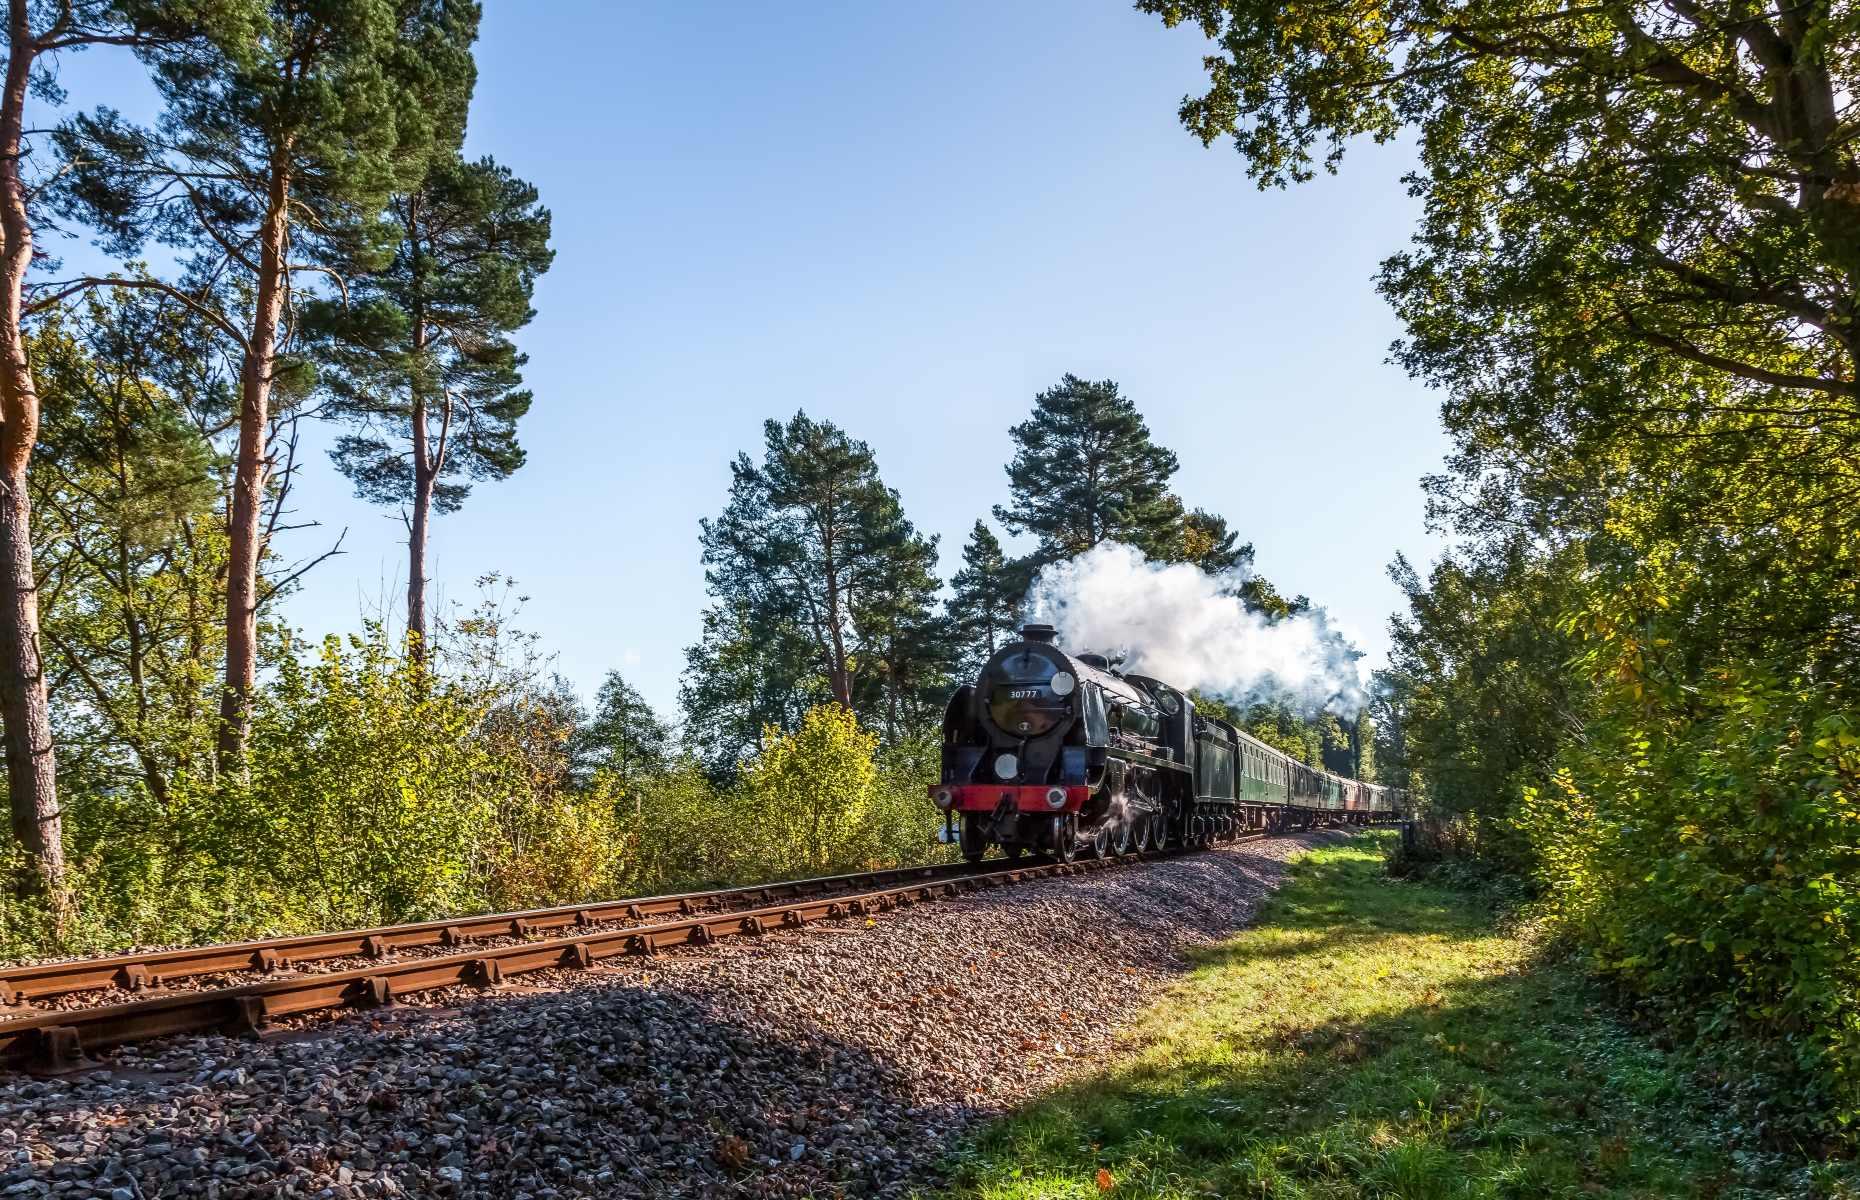 <p>Known as England’s oldest preserved standard-gauge railway, the <a href="https://www.bluebell-railway.com/">Bluebell</a> features one of the finest collections of vintage steam locomotives and carriages in the UK. Surrounded by rolling hills, the 11 mile-long (11.7km) route links Sheffield Park with East Grinstead. Stretching across the West and East Sussex border, the heritage line gets its name from the pretty bluebells that decorate the landscape each spring. With its railway staff dressed in period clothing, original signal boxes and charming vintage carriages, riding the Bluebell Railway is like stepping back in time.</p>